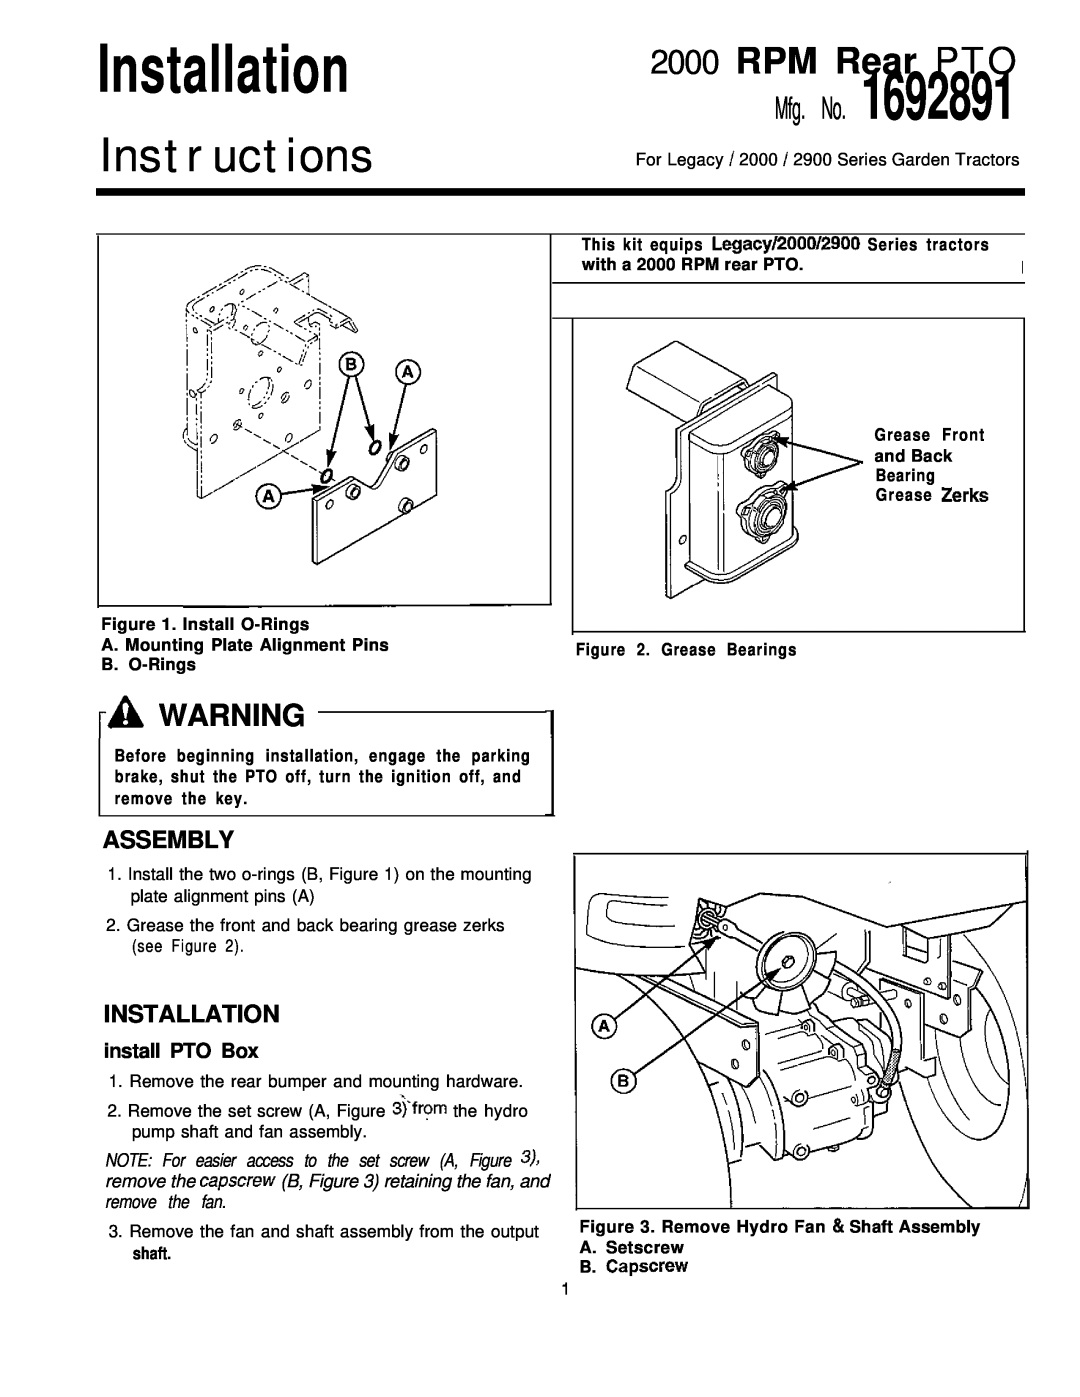 Simplicity 2000 Series installation instructions A Warning, Assembly, Installation, with a 2000 RPM rear PTO, B. O-Rings 